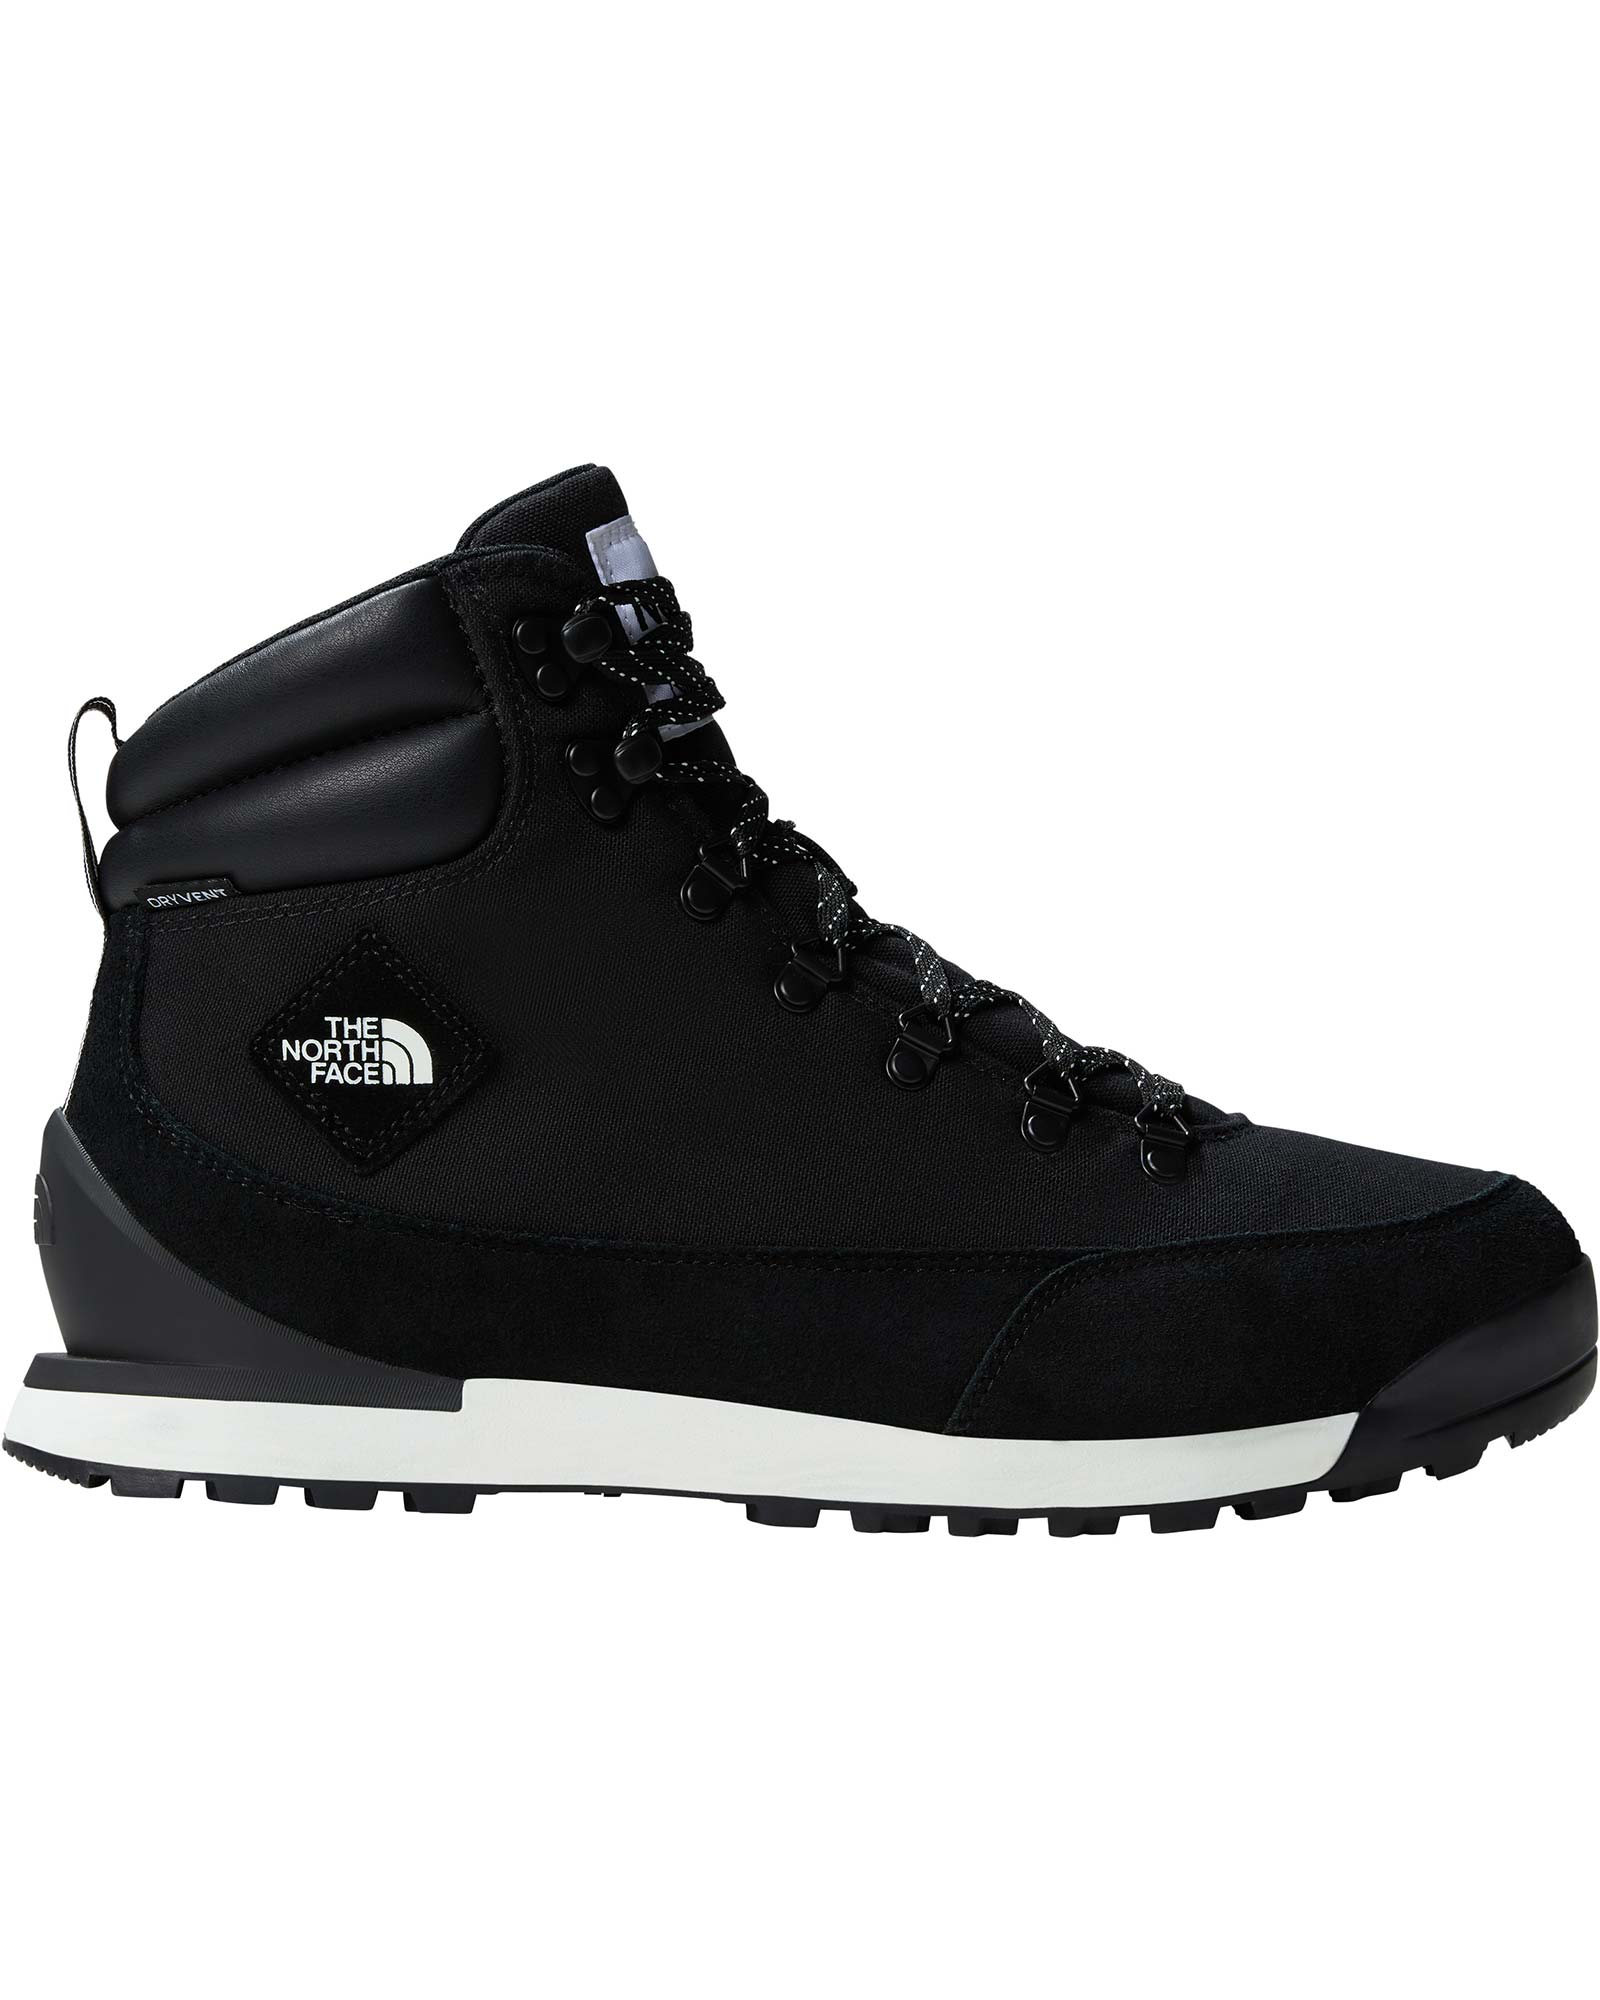 The North Face Back to Berkeley IV Textile Waterproof Men’s Boots - TNF Black/TNF White UK 10